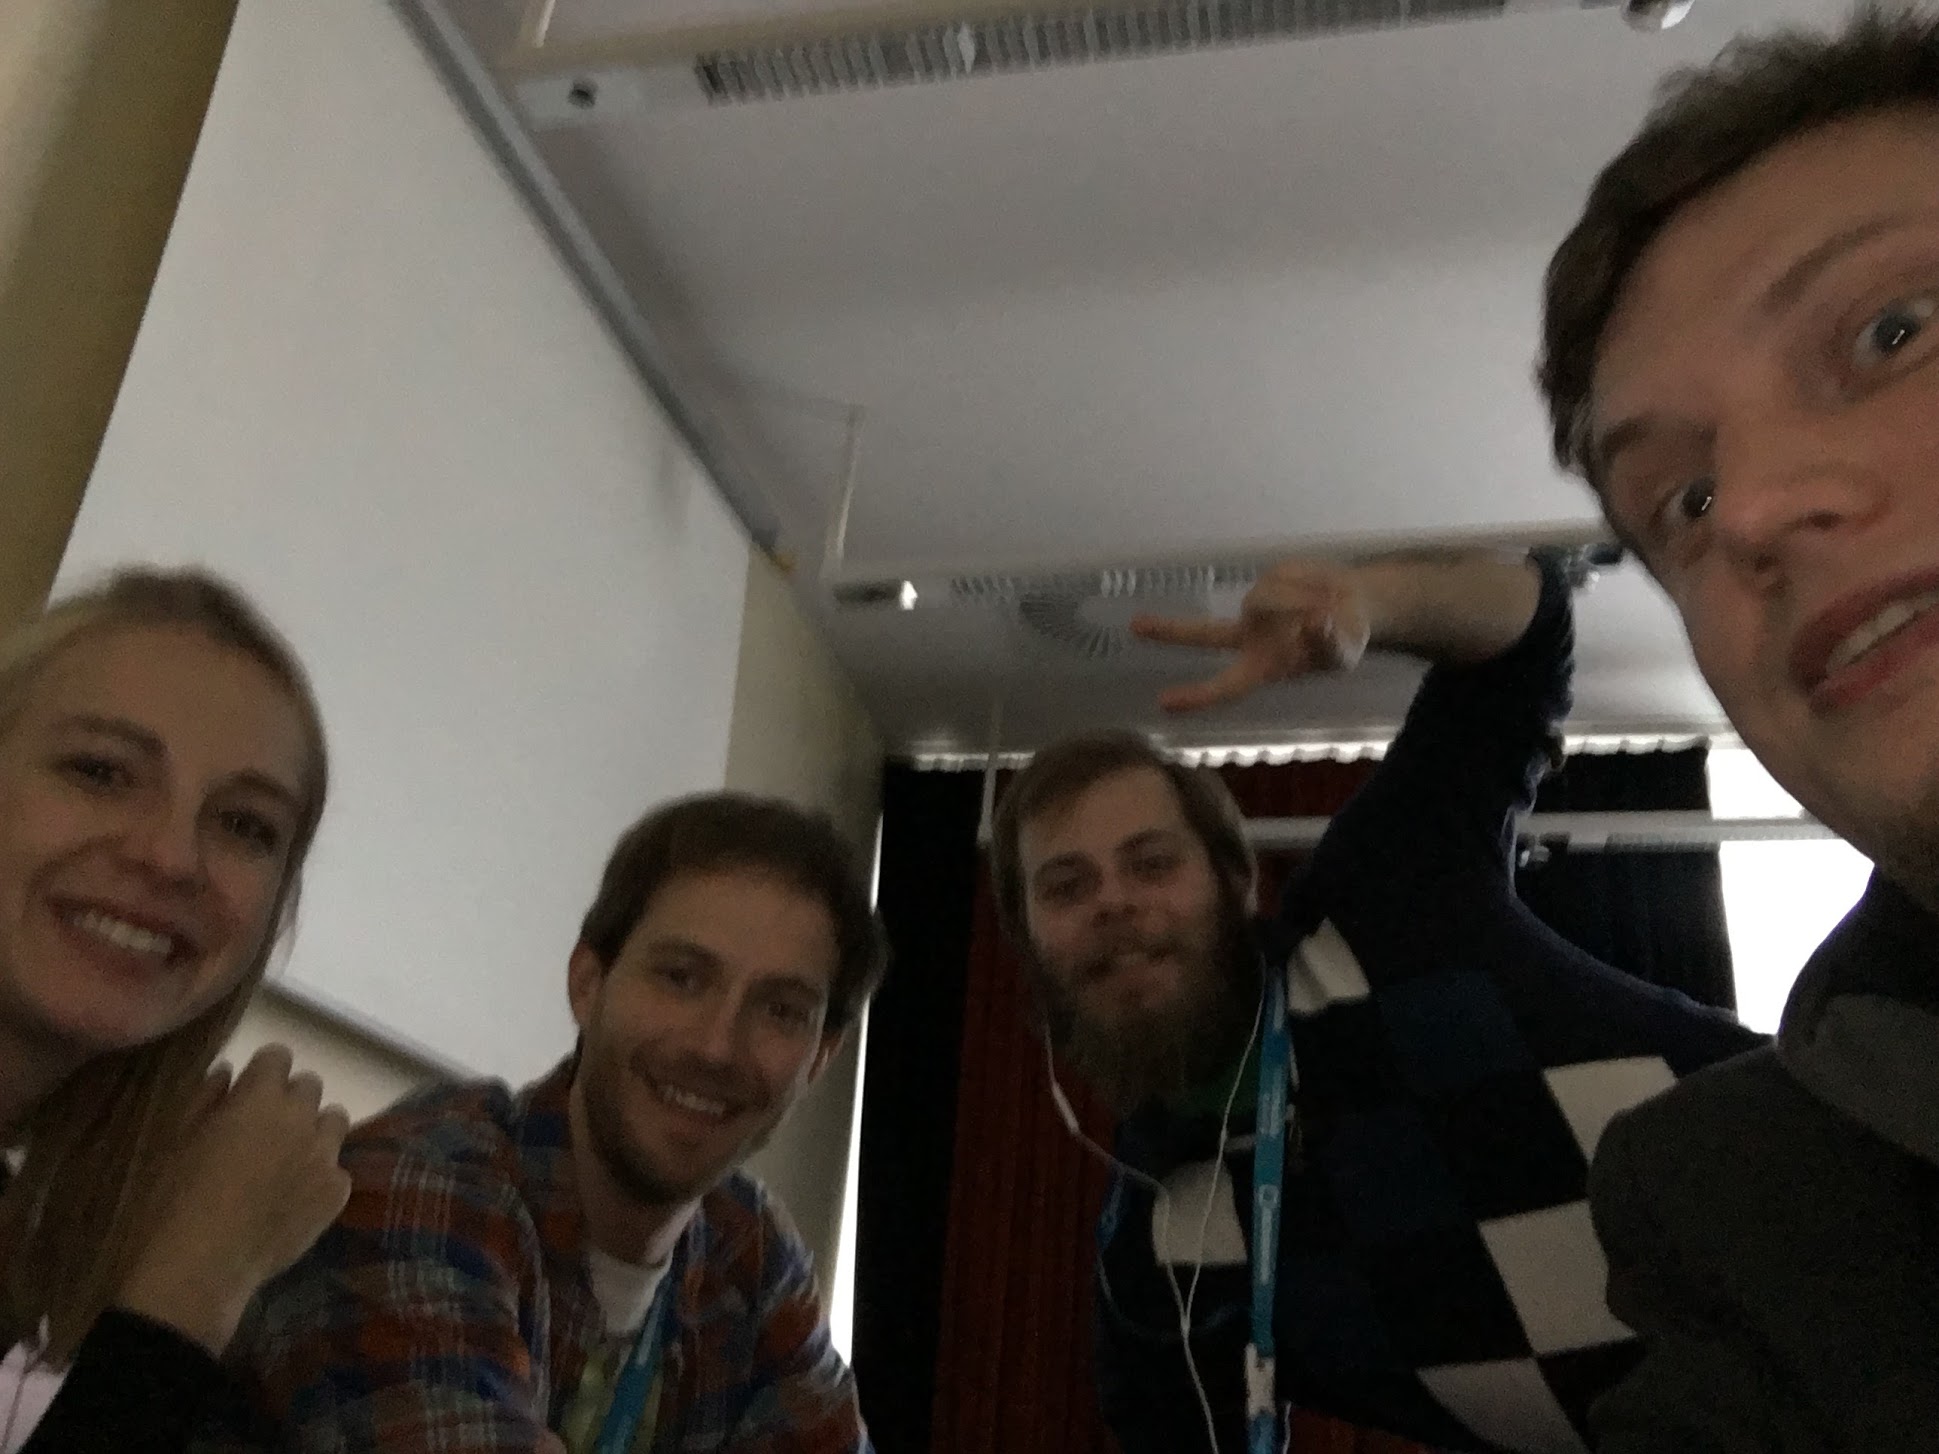 Selfie with guests while recording this episode; From the right: Nicole Laux, Dominic Eskofier, Petr Legkov, Kris Izdebski